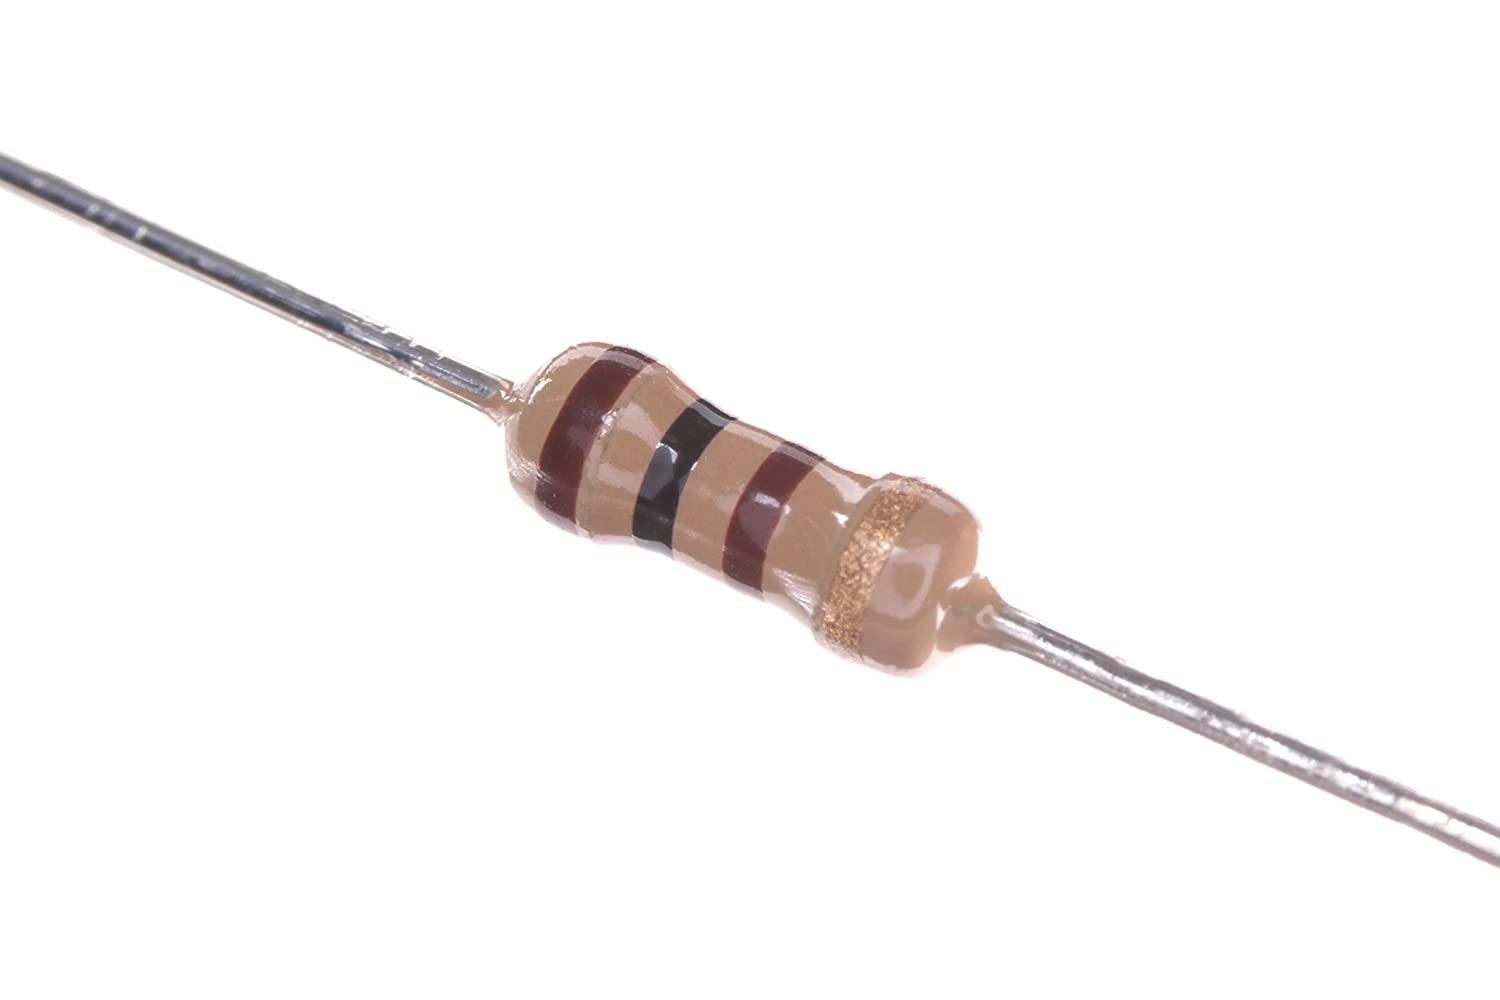 Buy 100 Ohm Resistor - (Pack of 10) Online in India